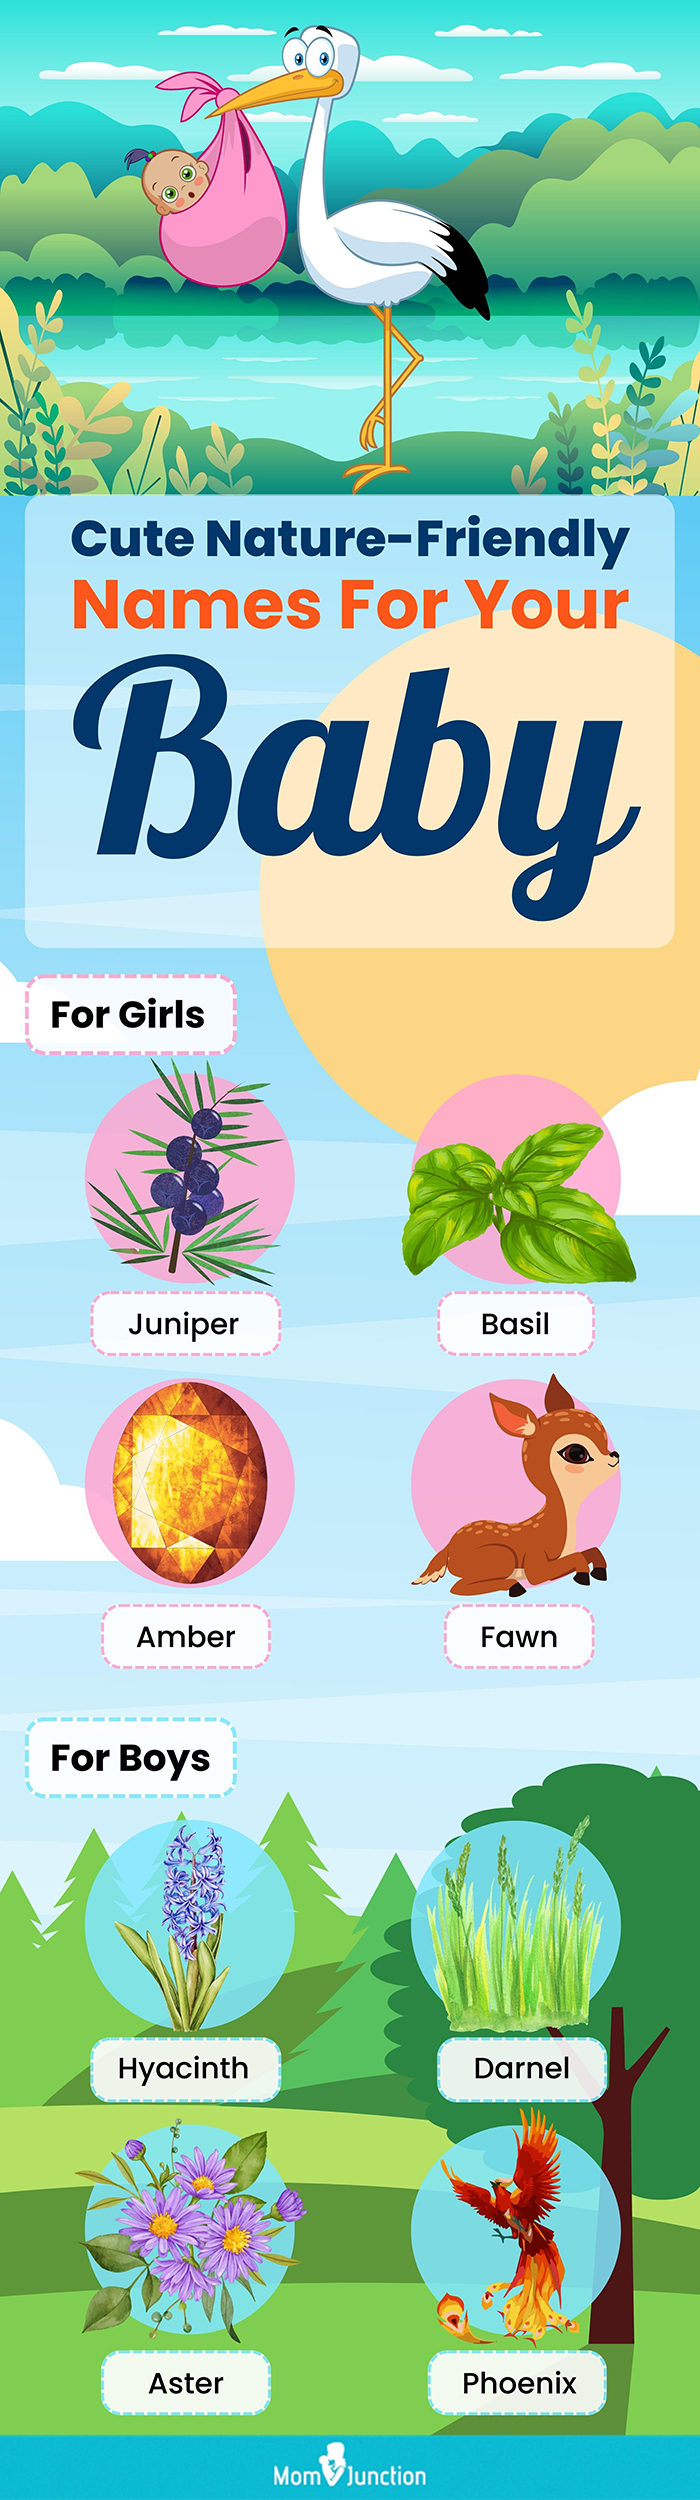 cute naturefriendly names for your baby (infographic)